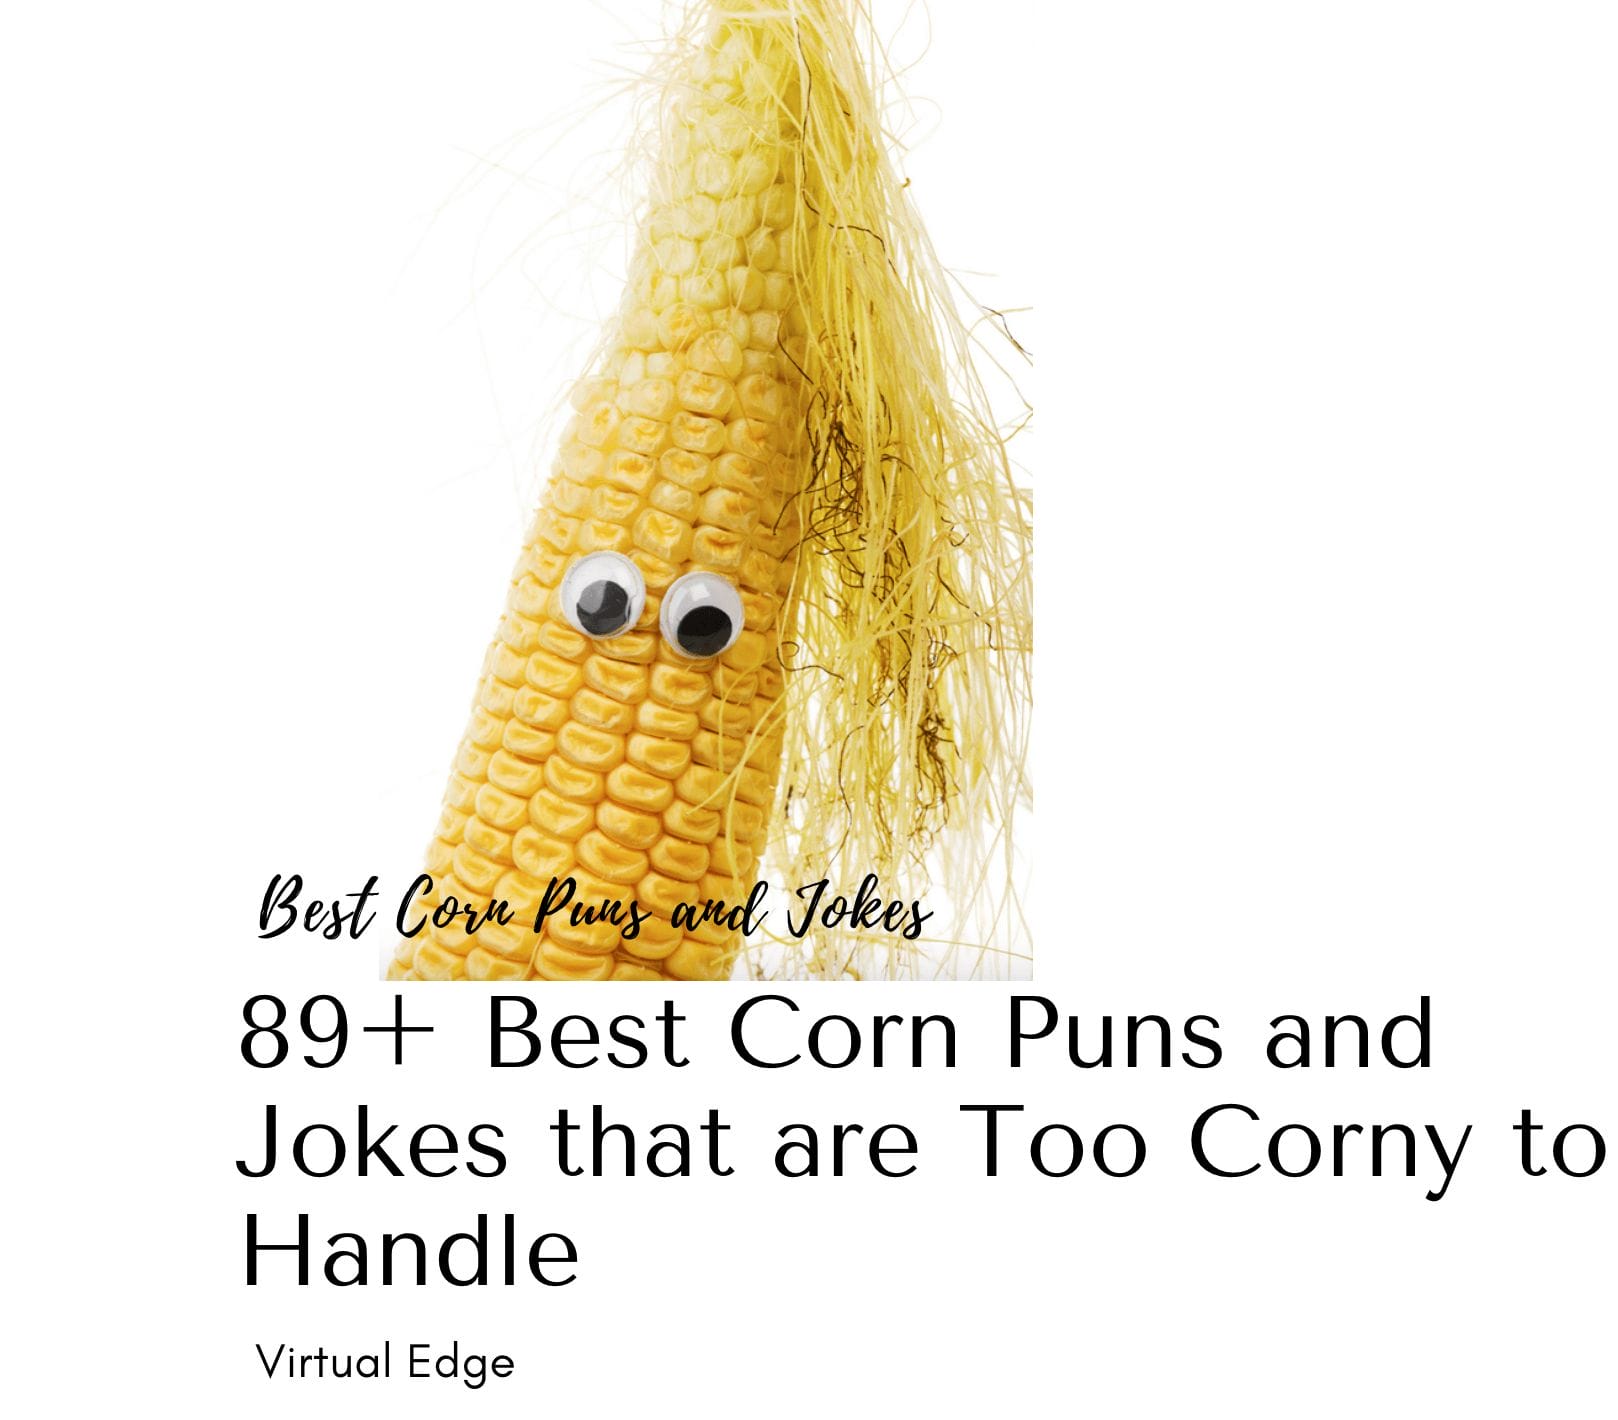 89+ Best Corn Puns and Jokes that are Too Corny to Handle